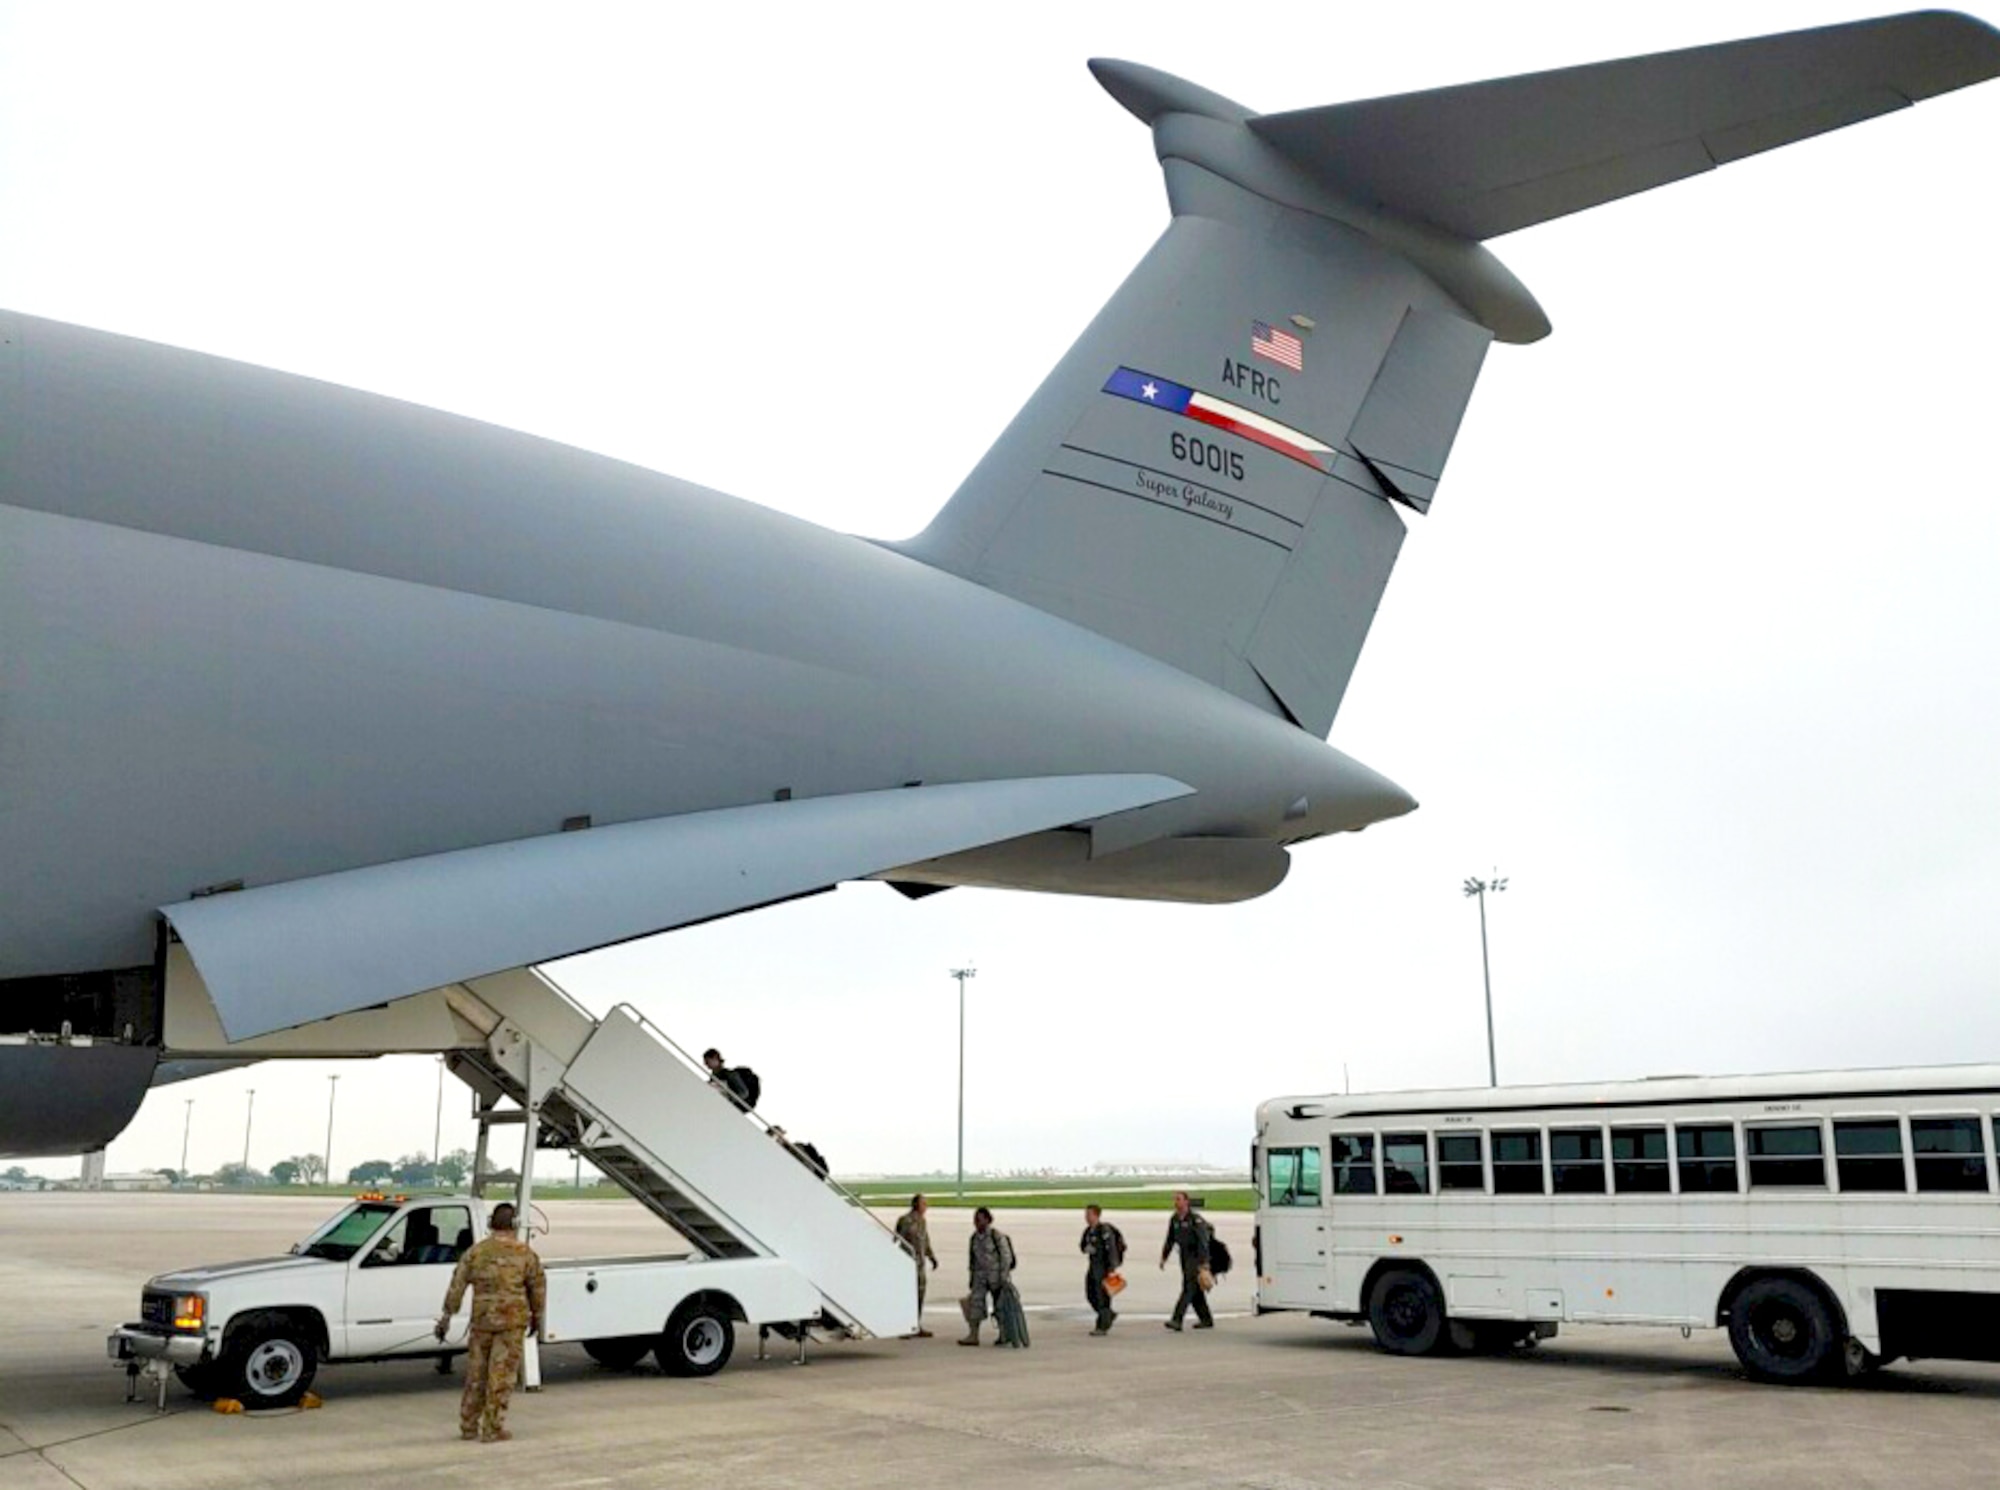 Reservists load into a C-5 Super Galaxy Aircraft to help support COVID-19 relief efforts.